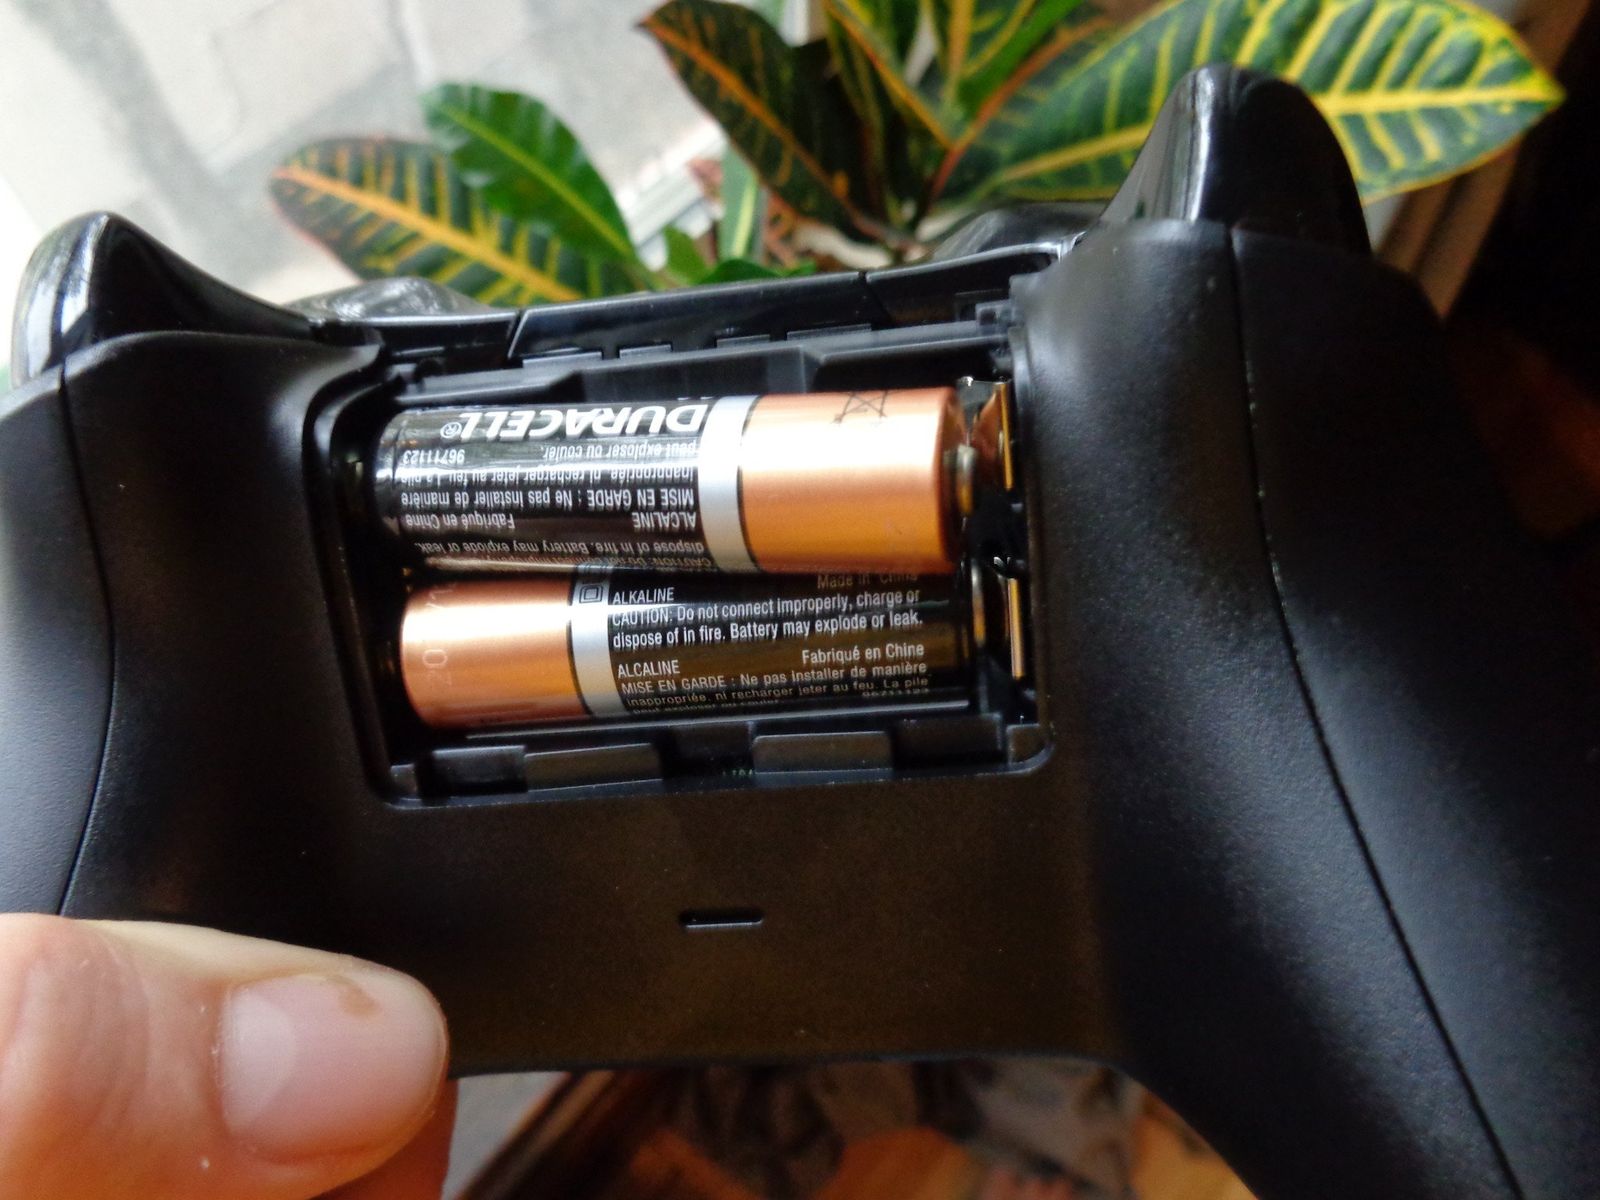 Do rechargeable batteries use Xbox controllers?